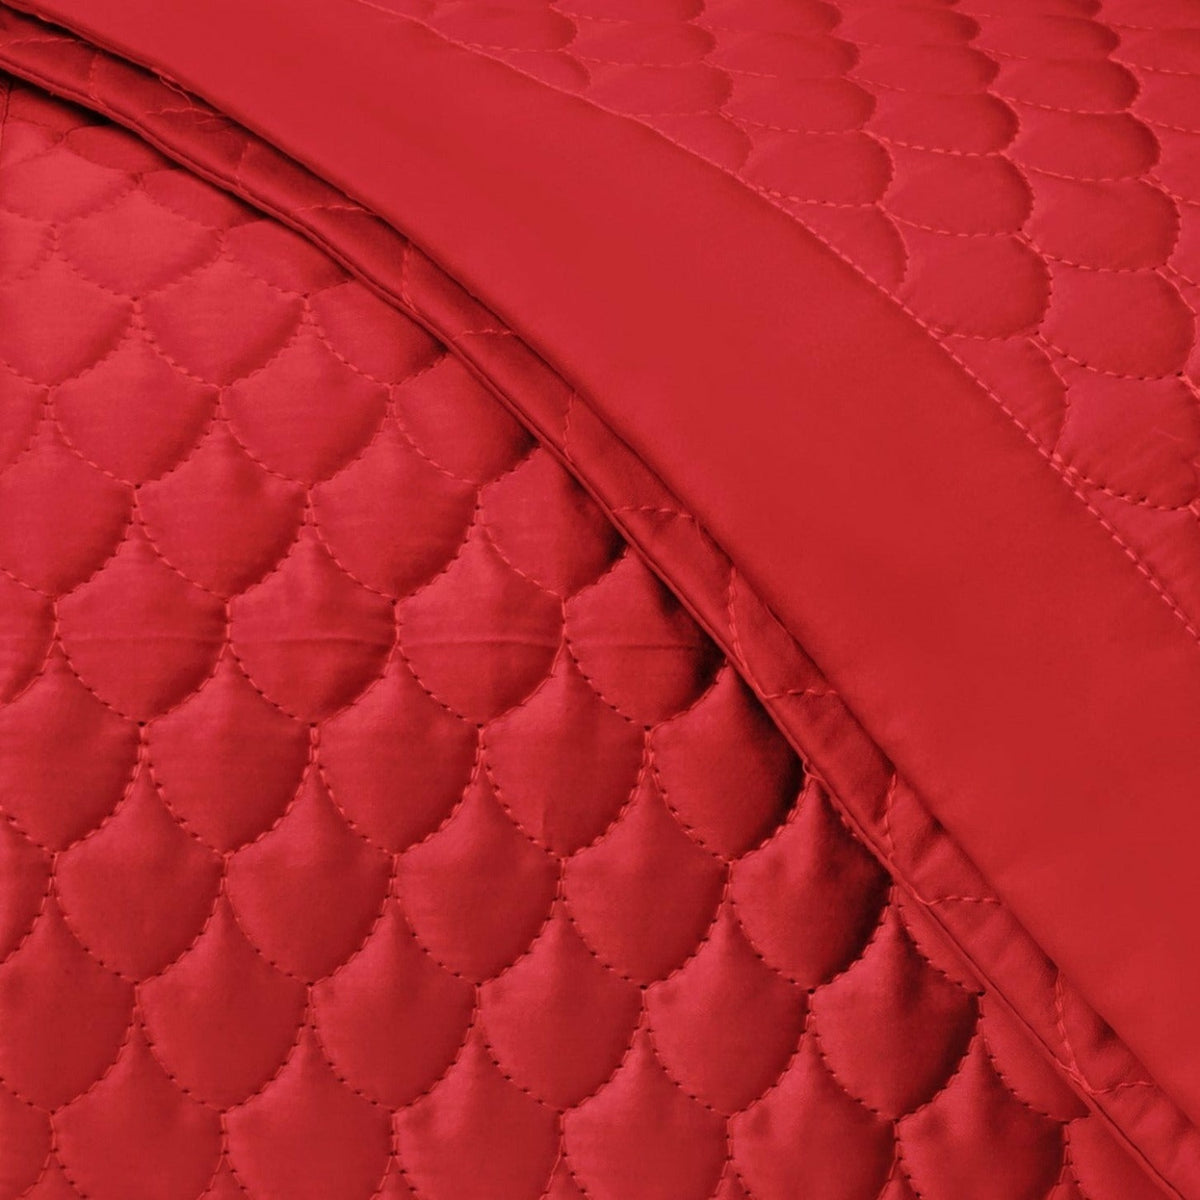 Home Treasures Raindrop Quilted Bedding Swatch Bright Red Fine Linens